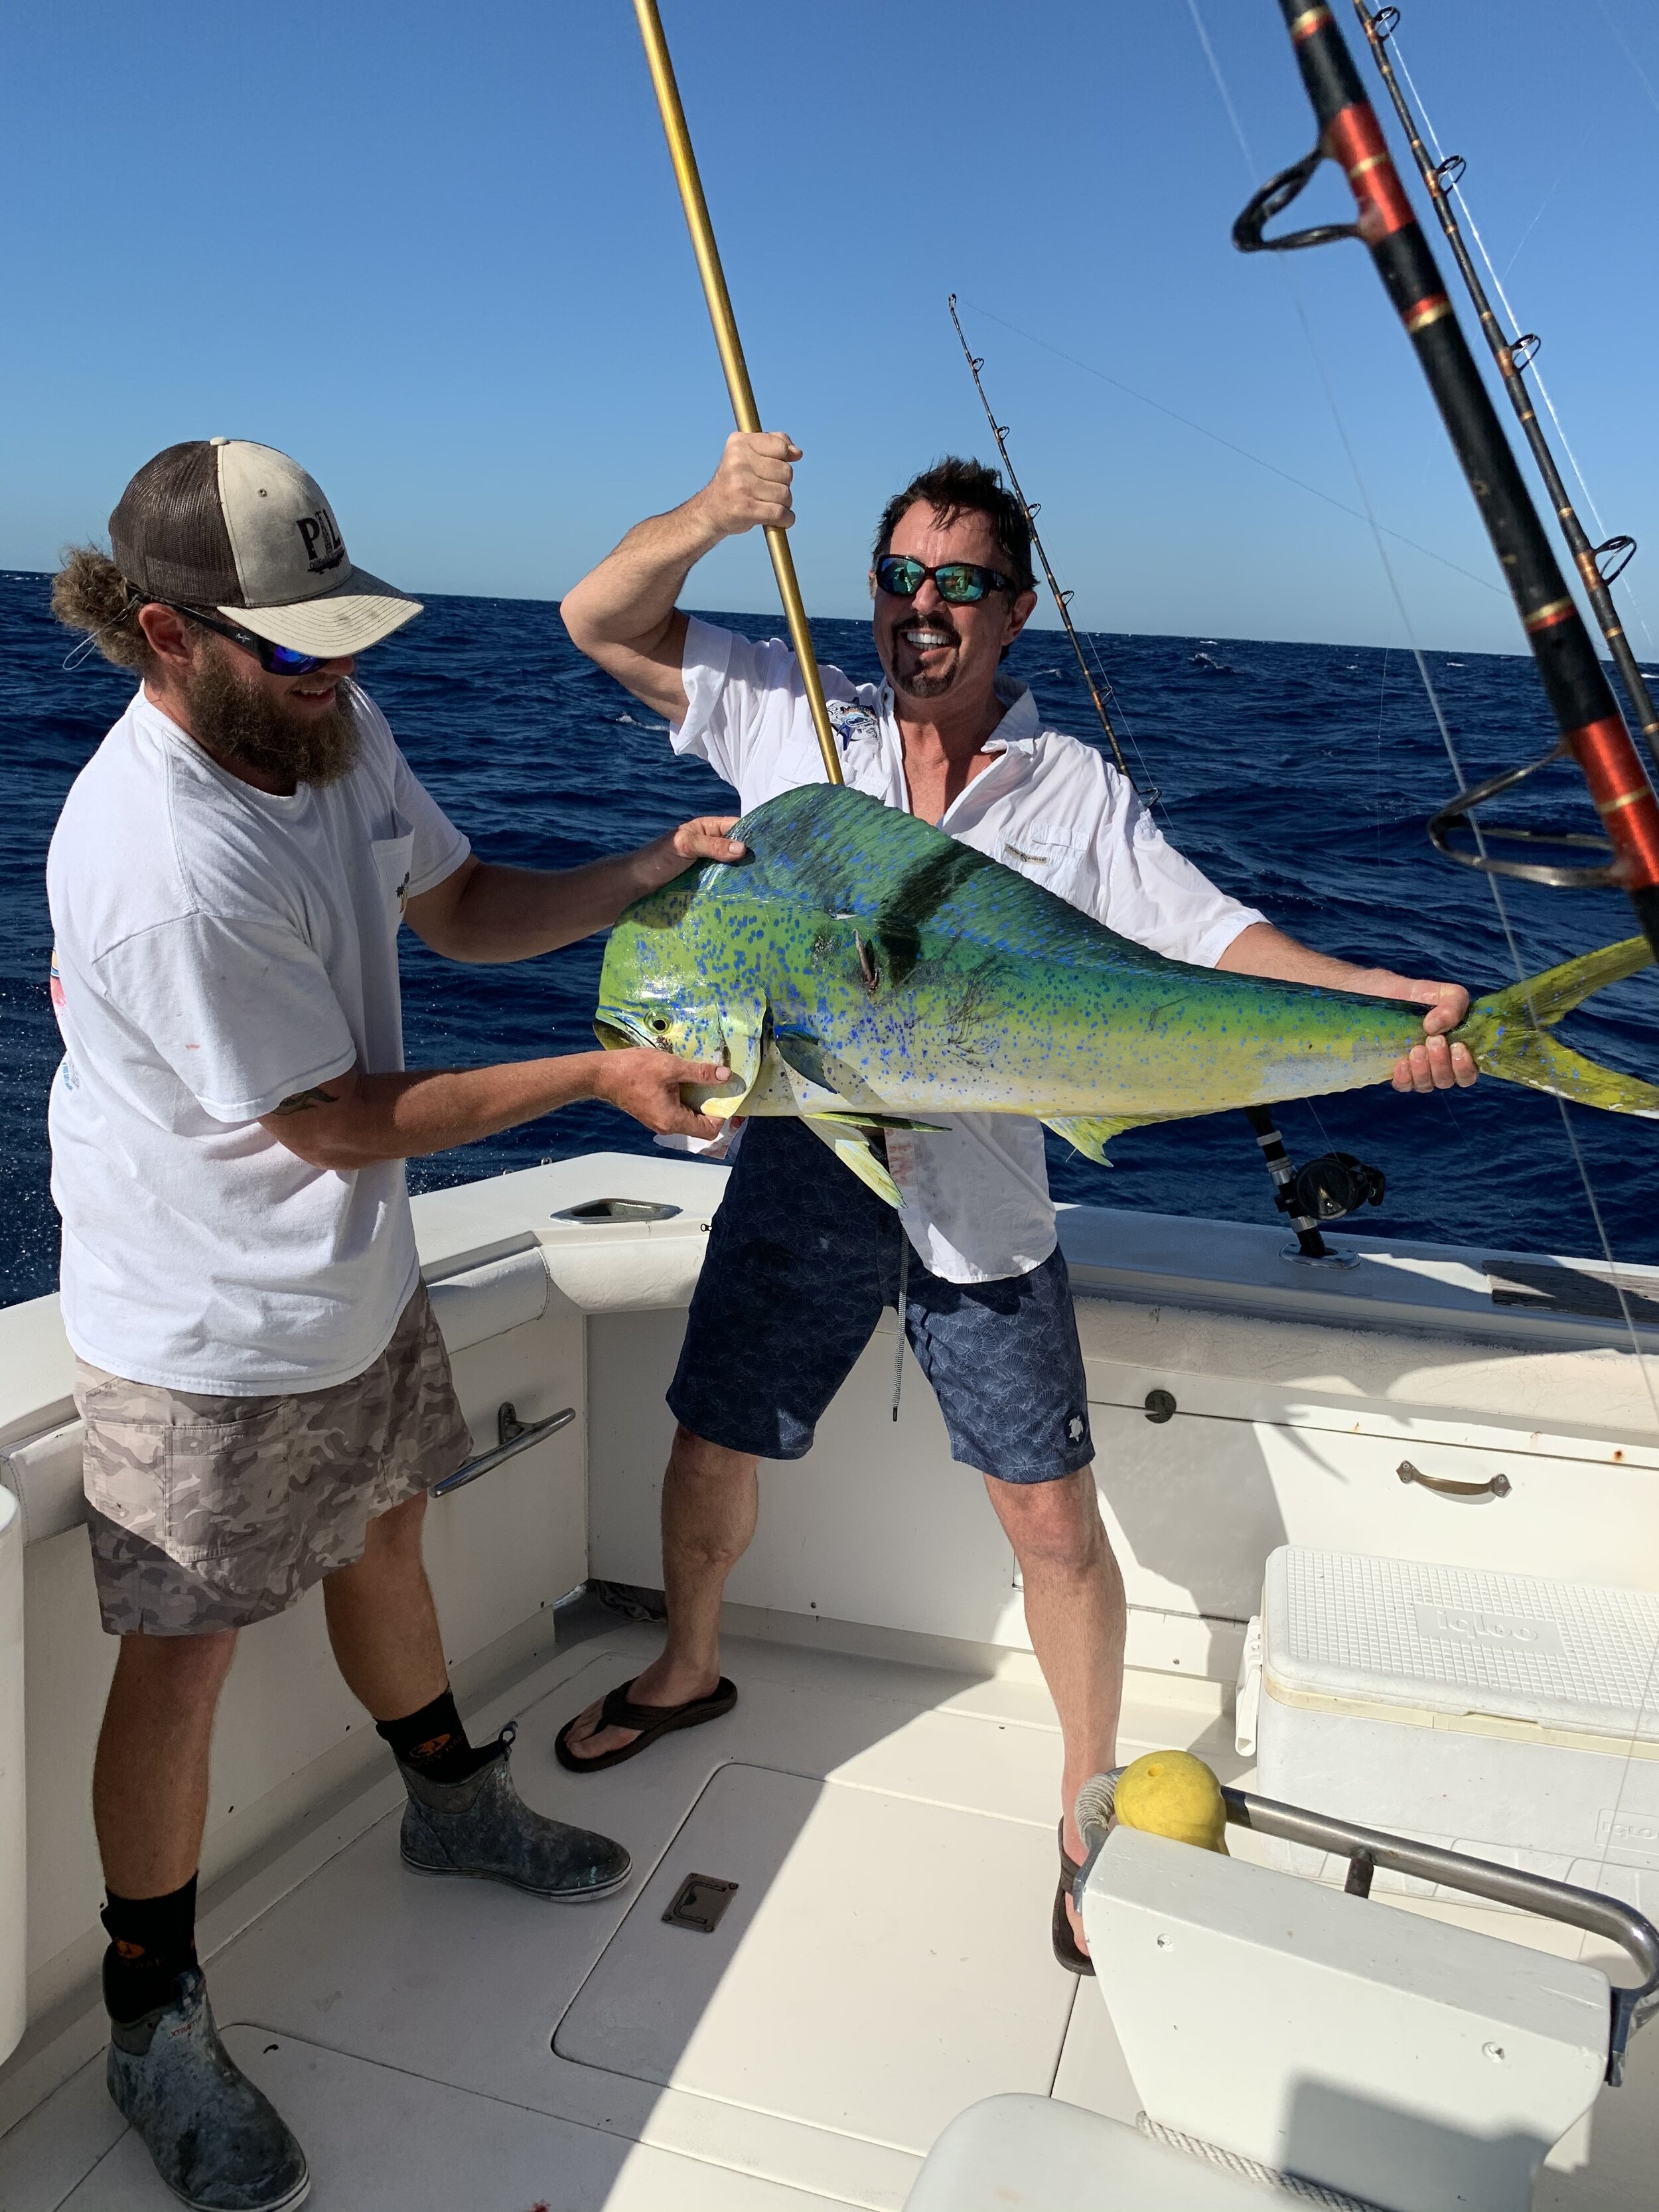 Mahi! Our charter boat "Seaclusion" was phenomenal. Thanks guys!